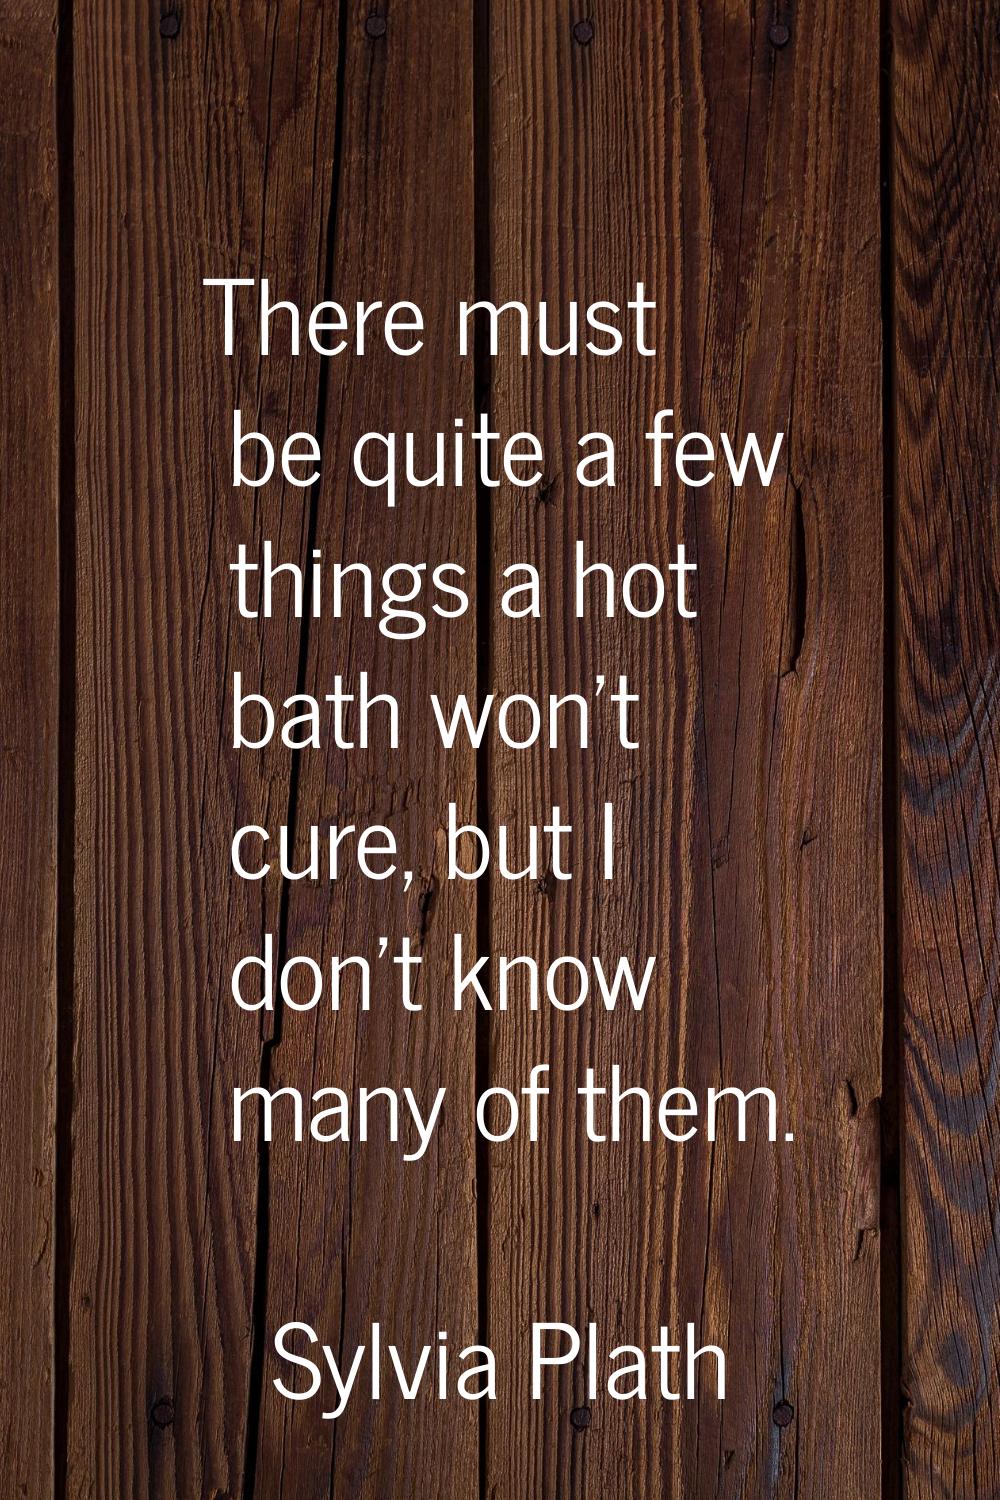 There must be quite a few things a hot bath won't cure, but I don't know many of them.